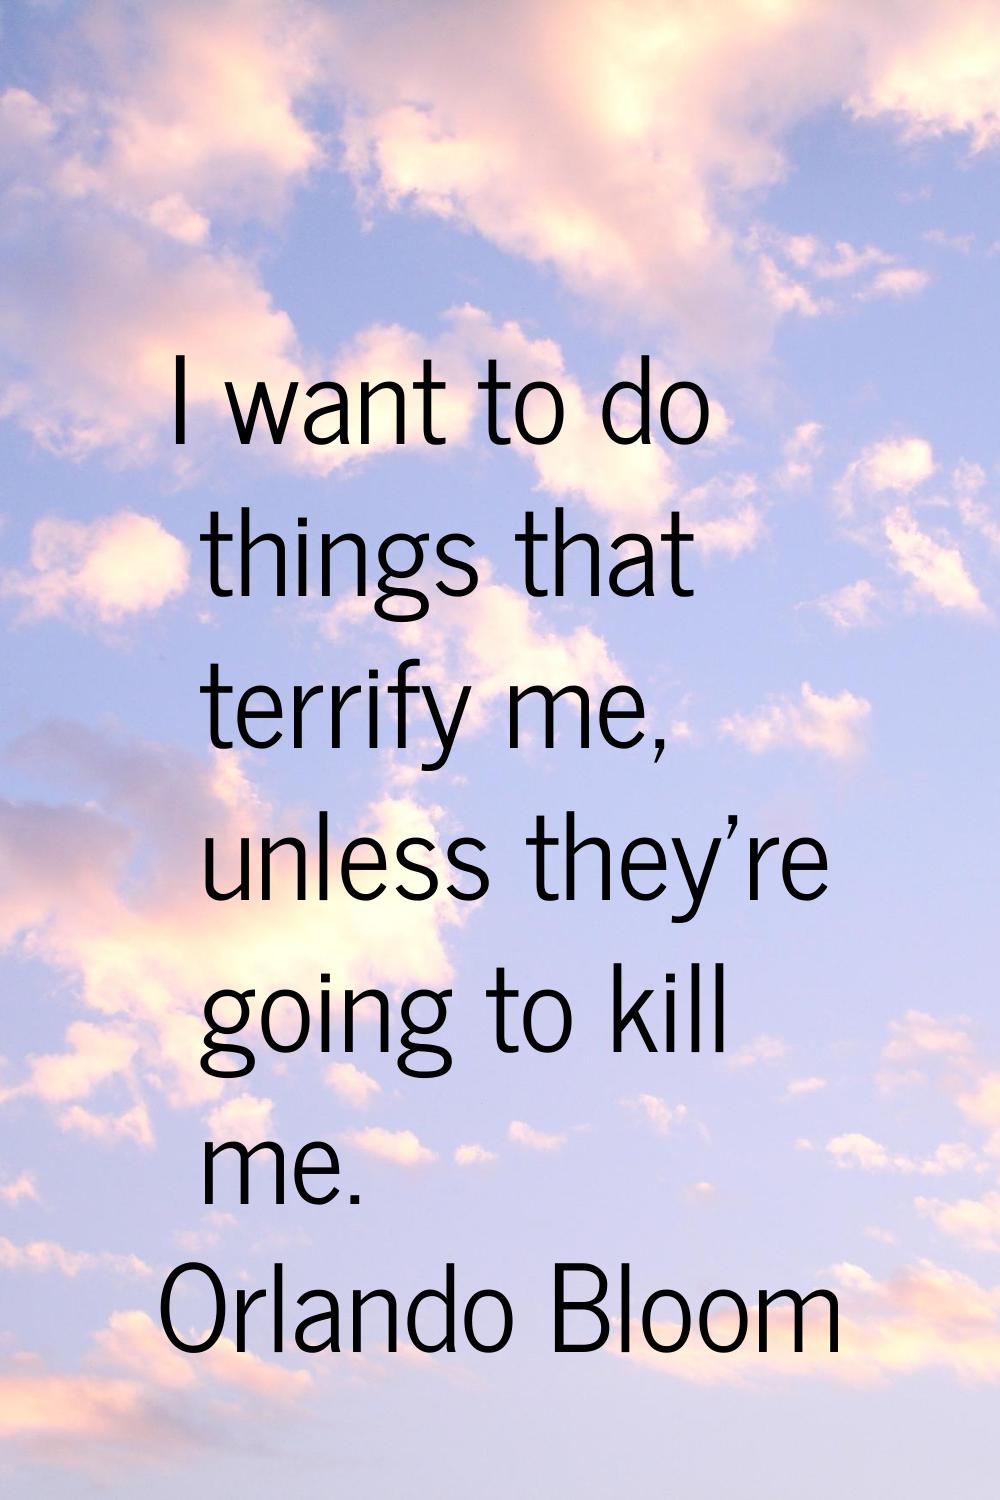 I want to do things that terrify me, unless they're going to kill me.